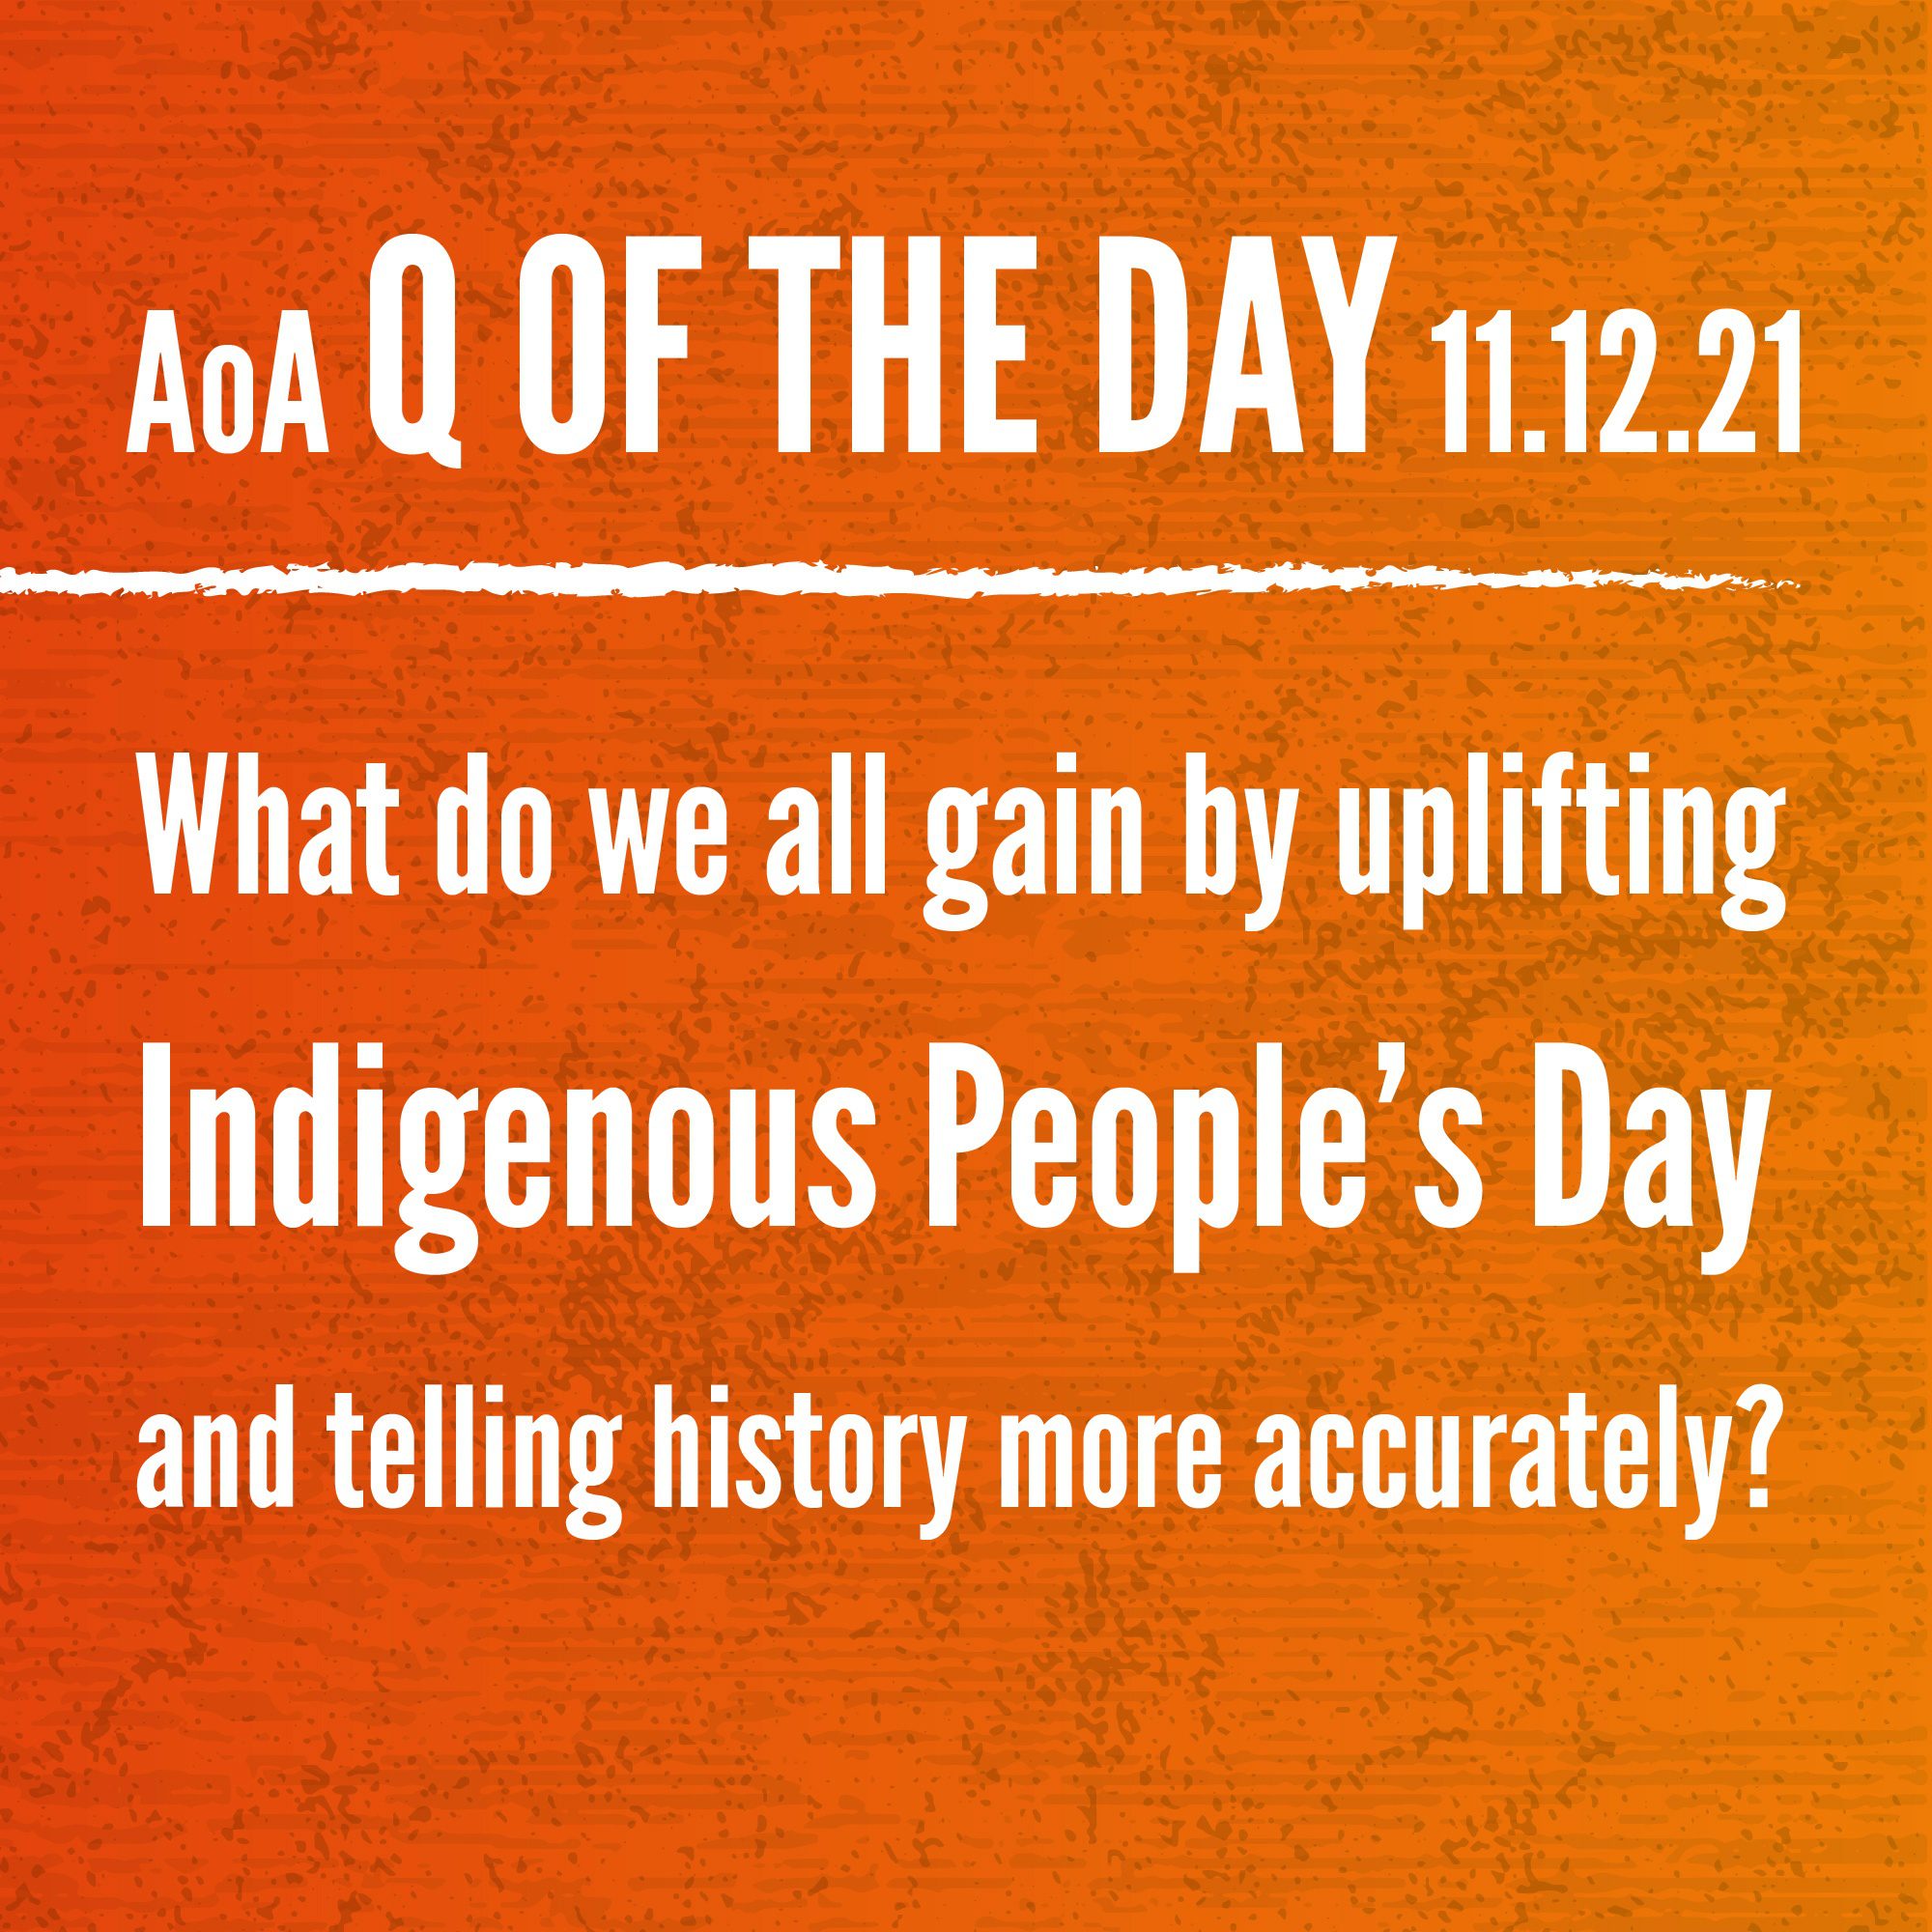 AoA Q of the Day November 12, 2021: What do we all gain by uplifting Indigenous People’s Day and telling history more accurately?